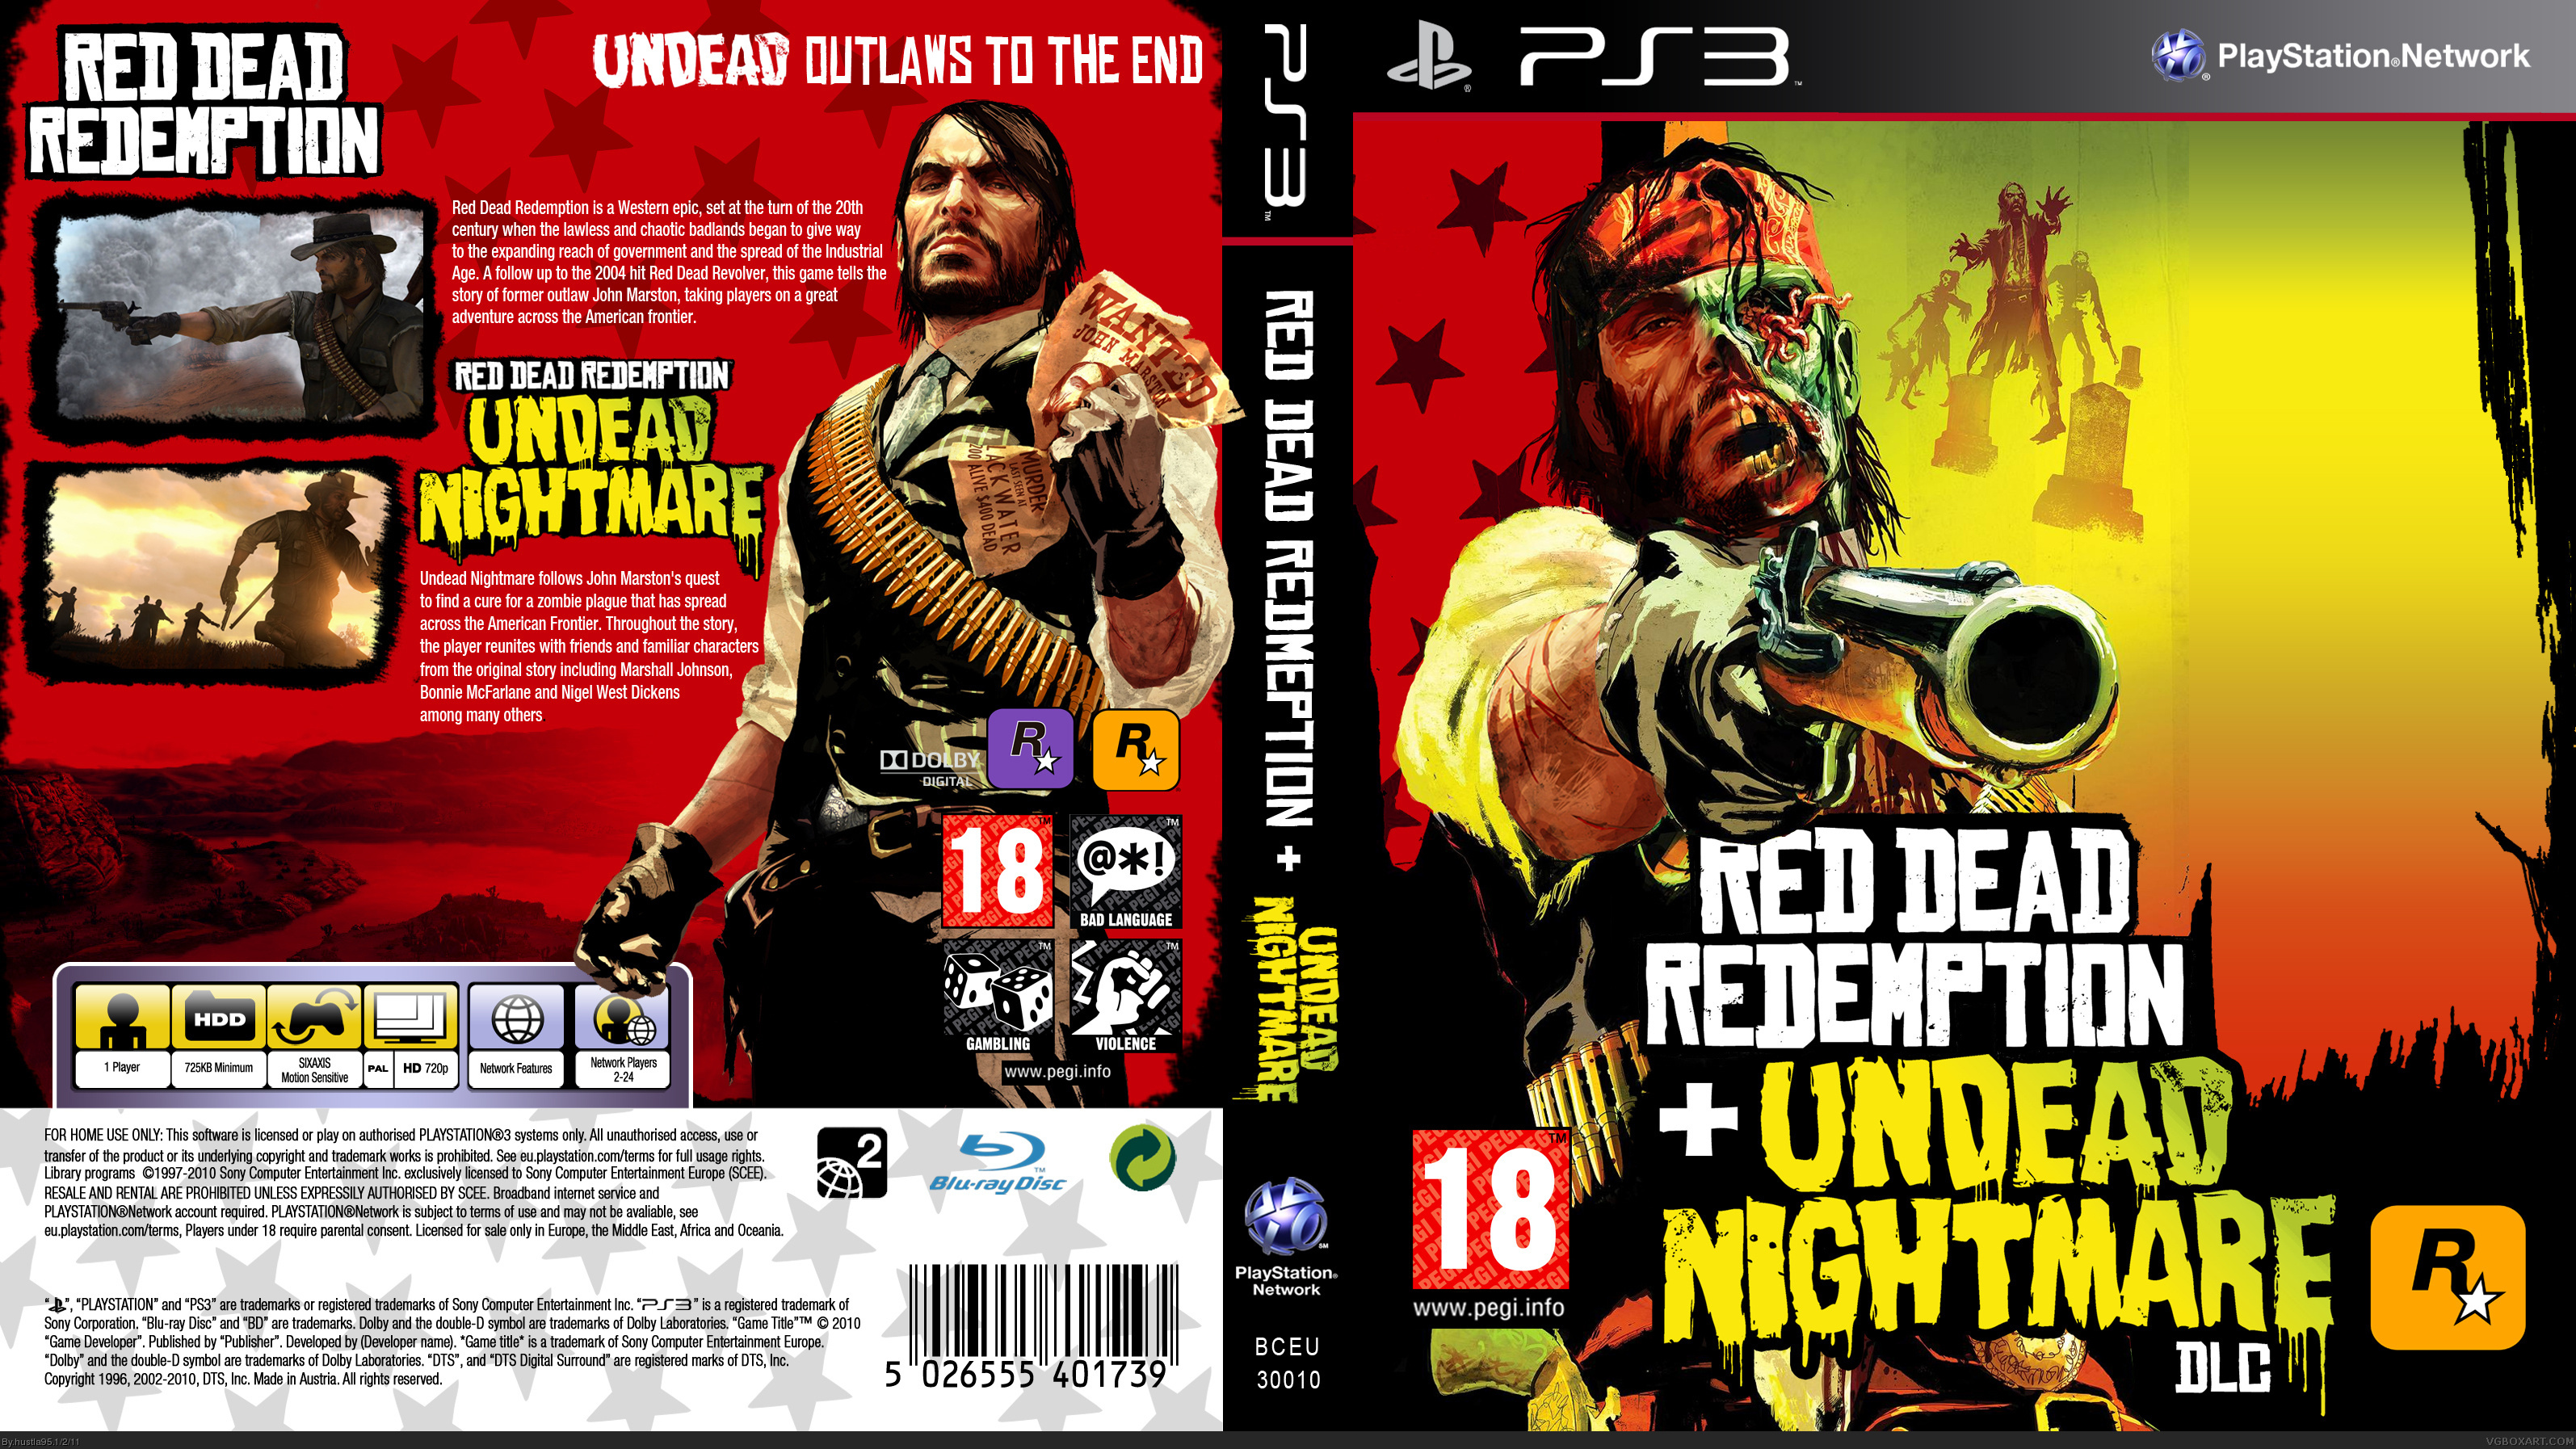 Rdr ps3. Red Dead Redemption Xbox 360 Cover. Red Dead Redemption PLAYSTATION 3. Red Dead Redemption Undead Nightmare Xbox 360. Red Dead Redemption Undead Nightmare Xbox 360 обложка.